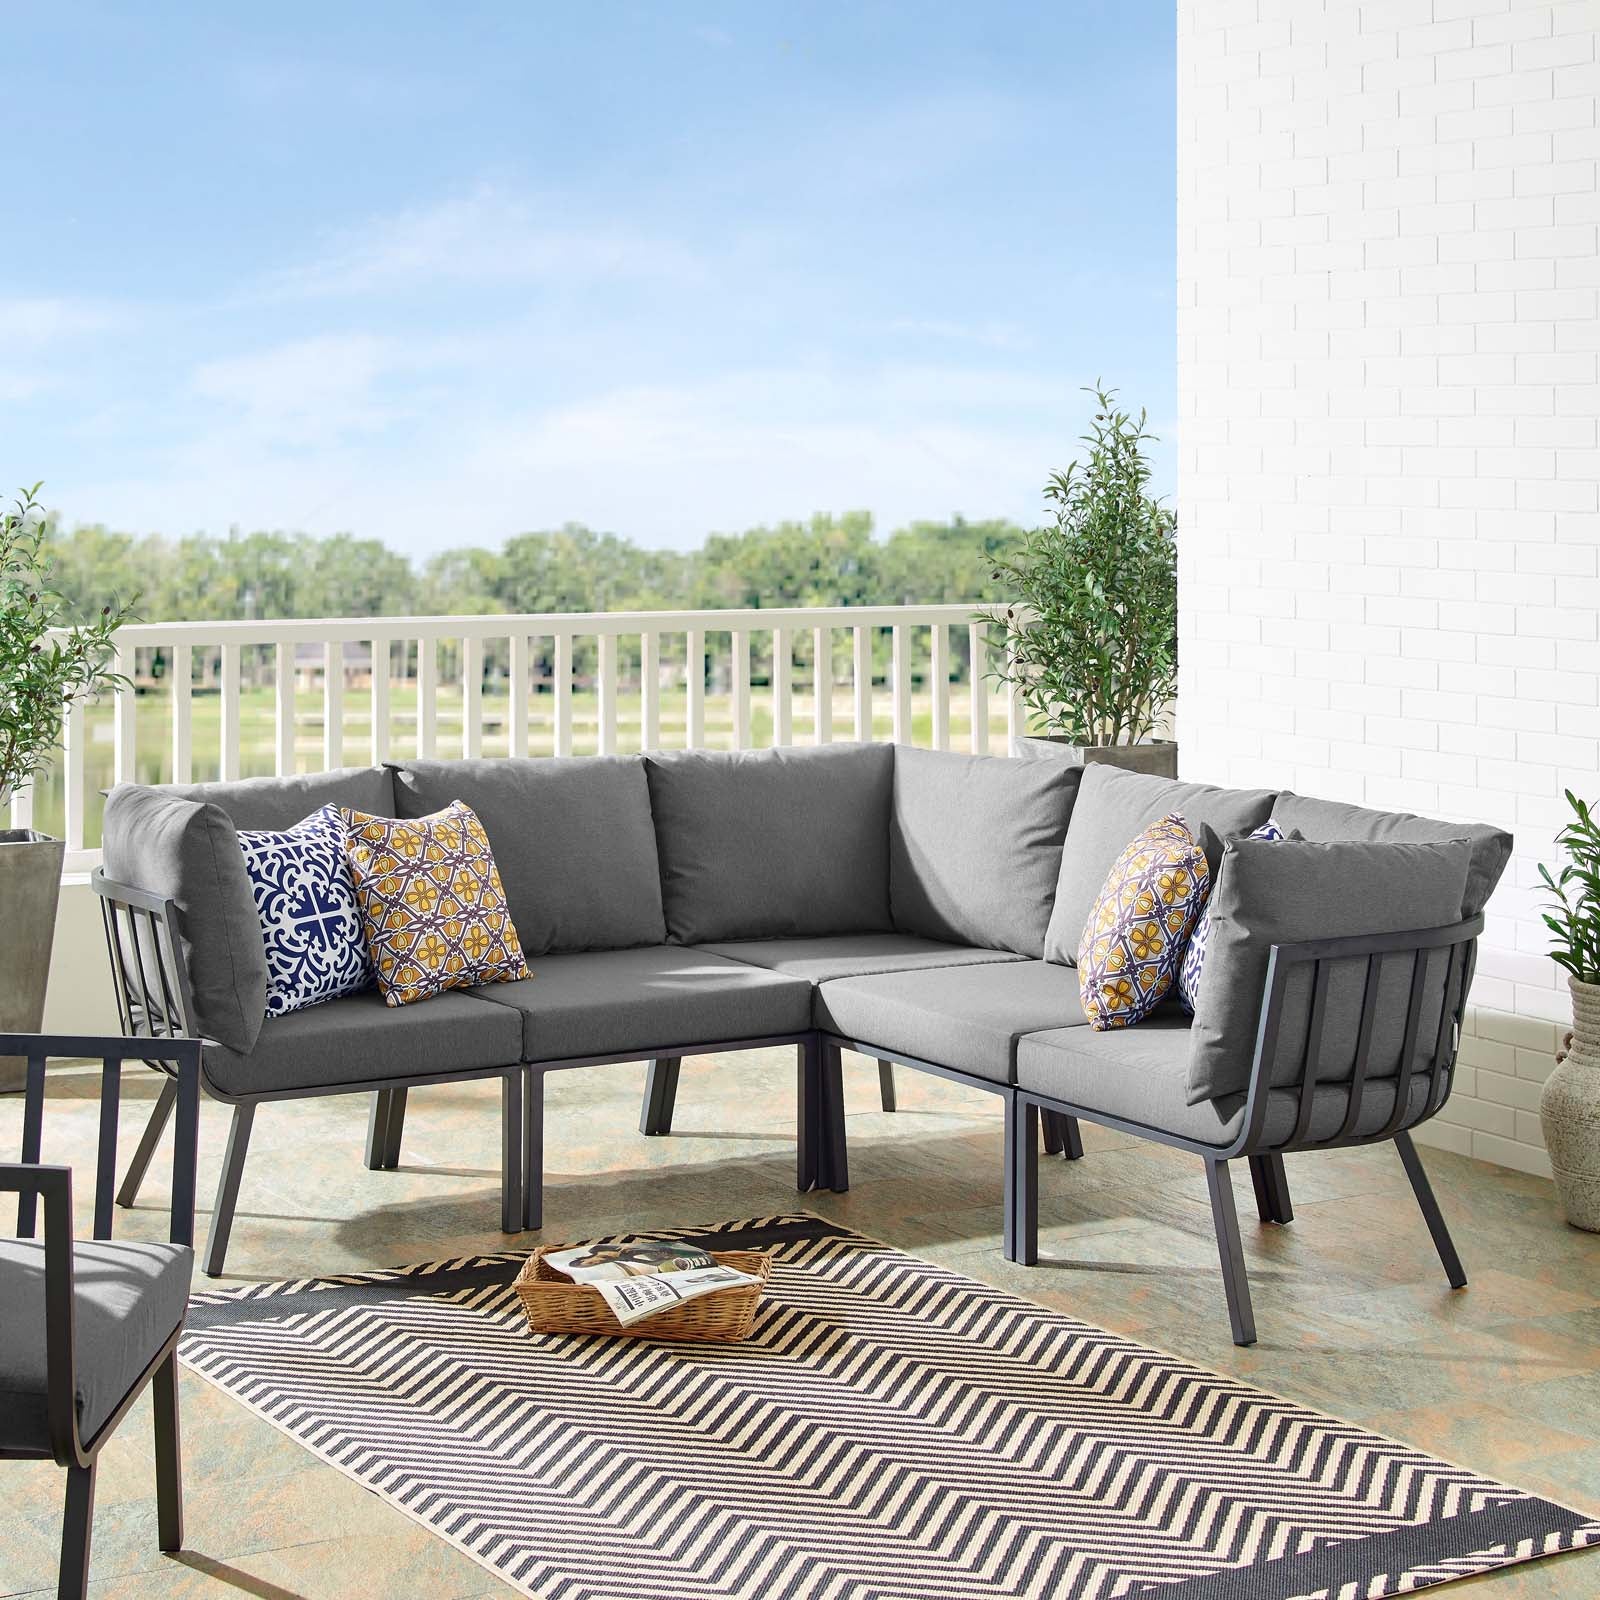 Modway Outdoor Sofas - Riverside 5 Piece Outdoor Patio Aluminum Sectional Gray Charcoal